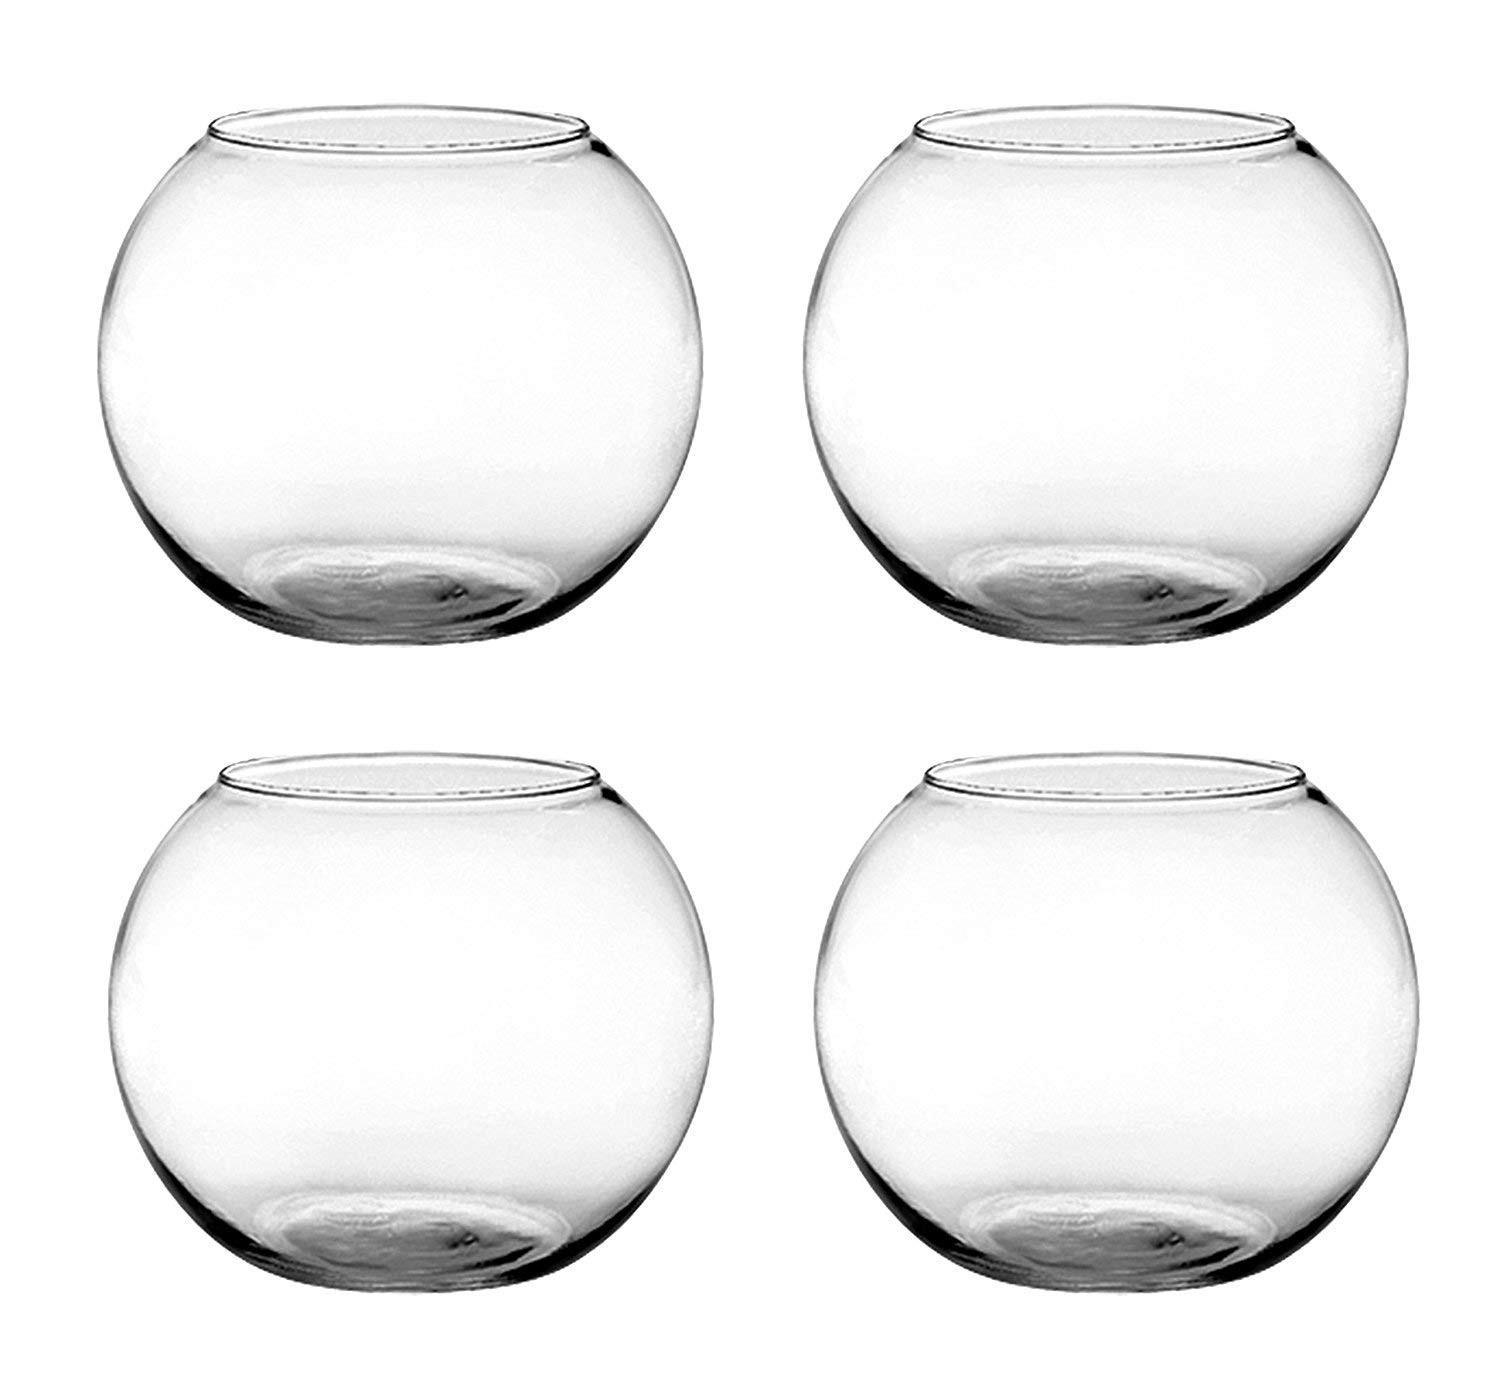 13 Best Square Glass Vases for Sale 2024 free download square glass vases for sale of amazon com floral supply online set of 4 6 rose bowls glass with regard to amazon com floral supply online set of 4 6 rose bowls glass round vases for weddings